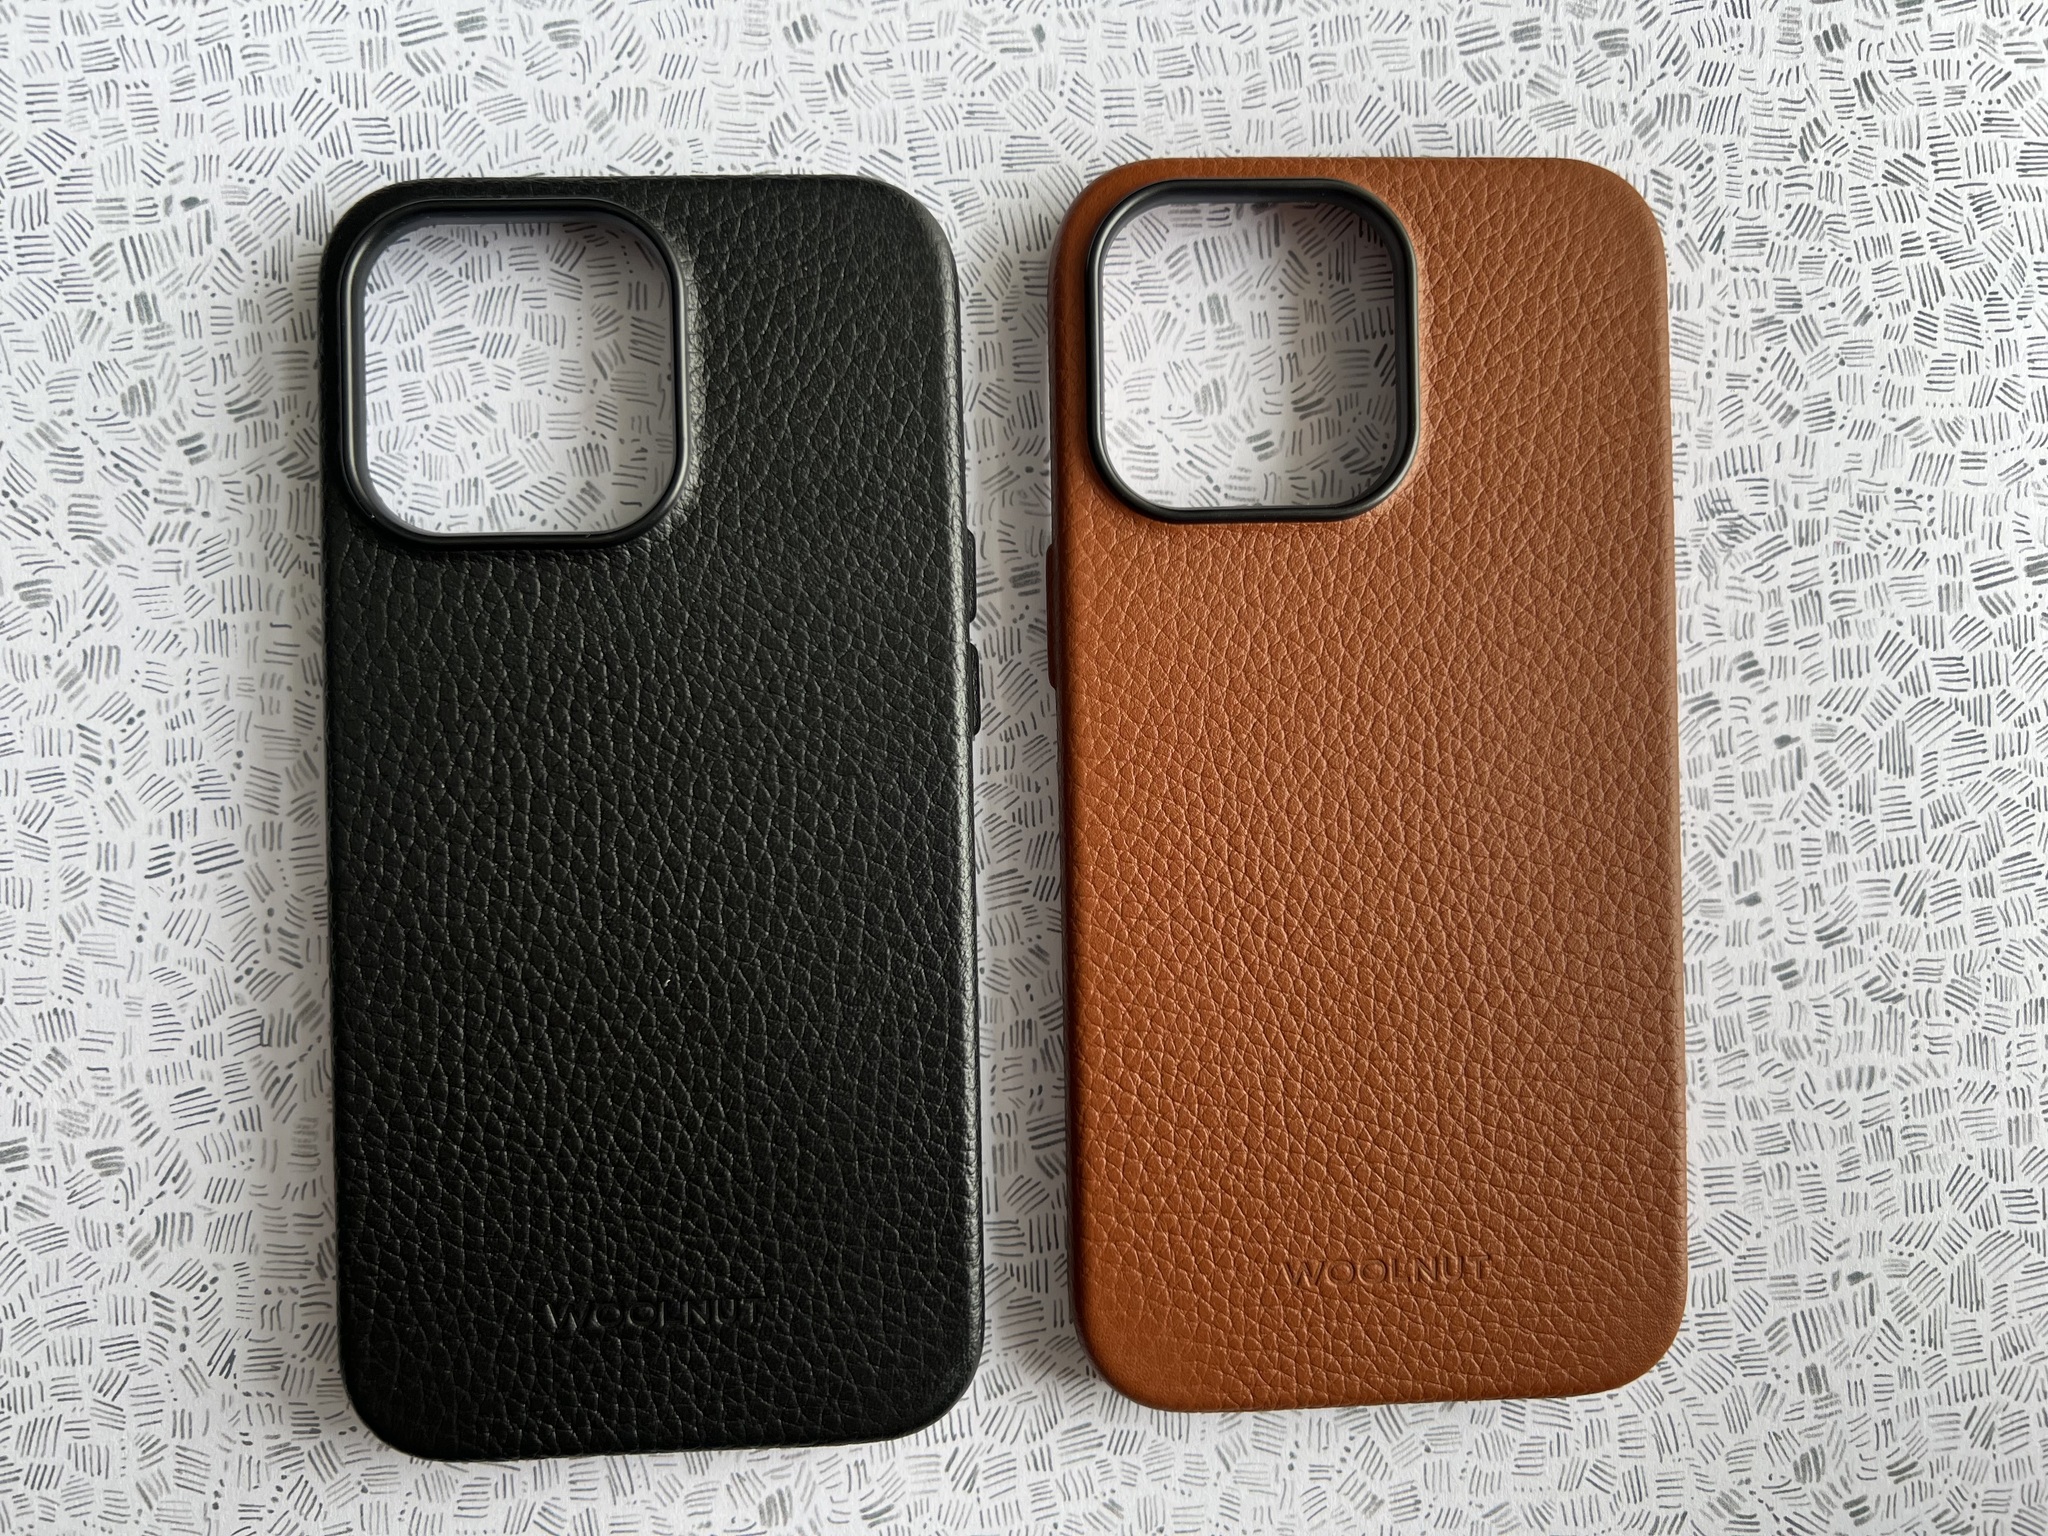 Woolnut Leather Case For Iphone With Magsafe Lifestyle Black And Cognac